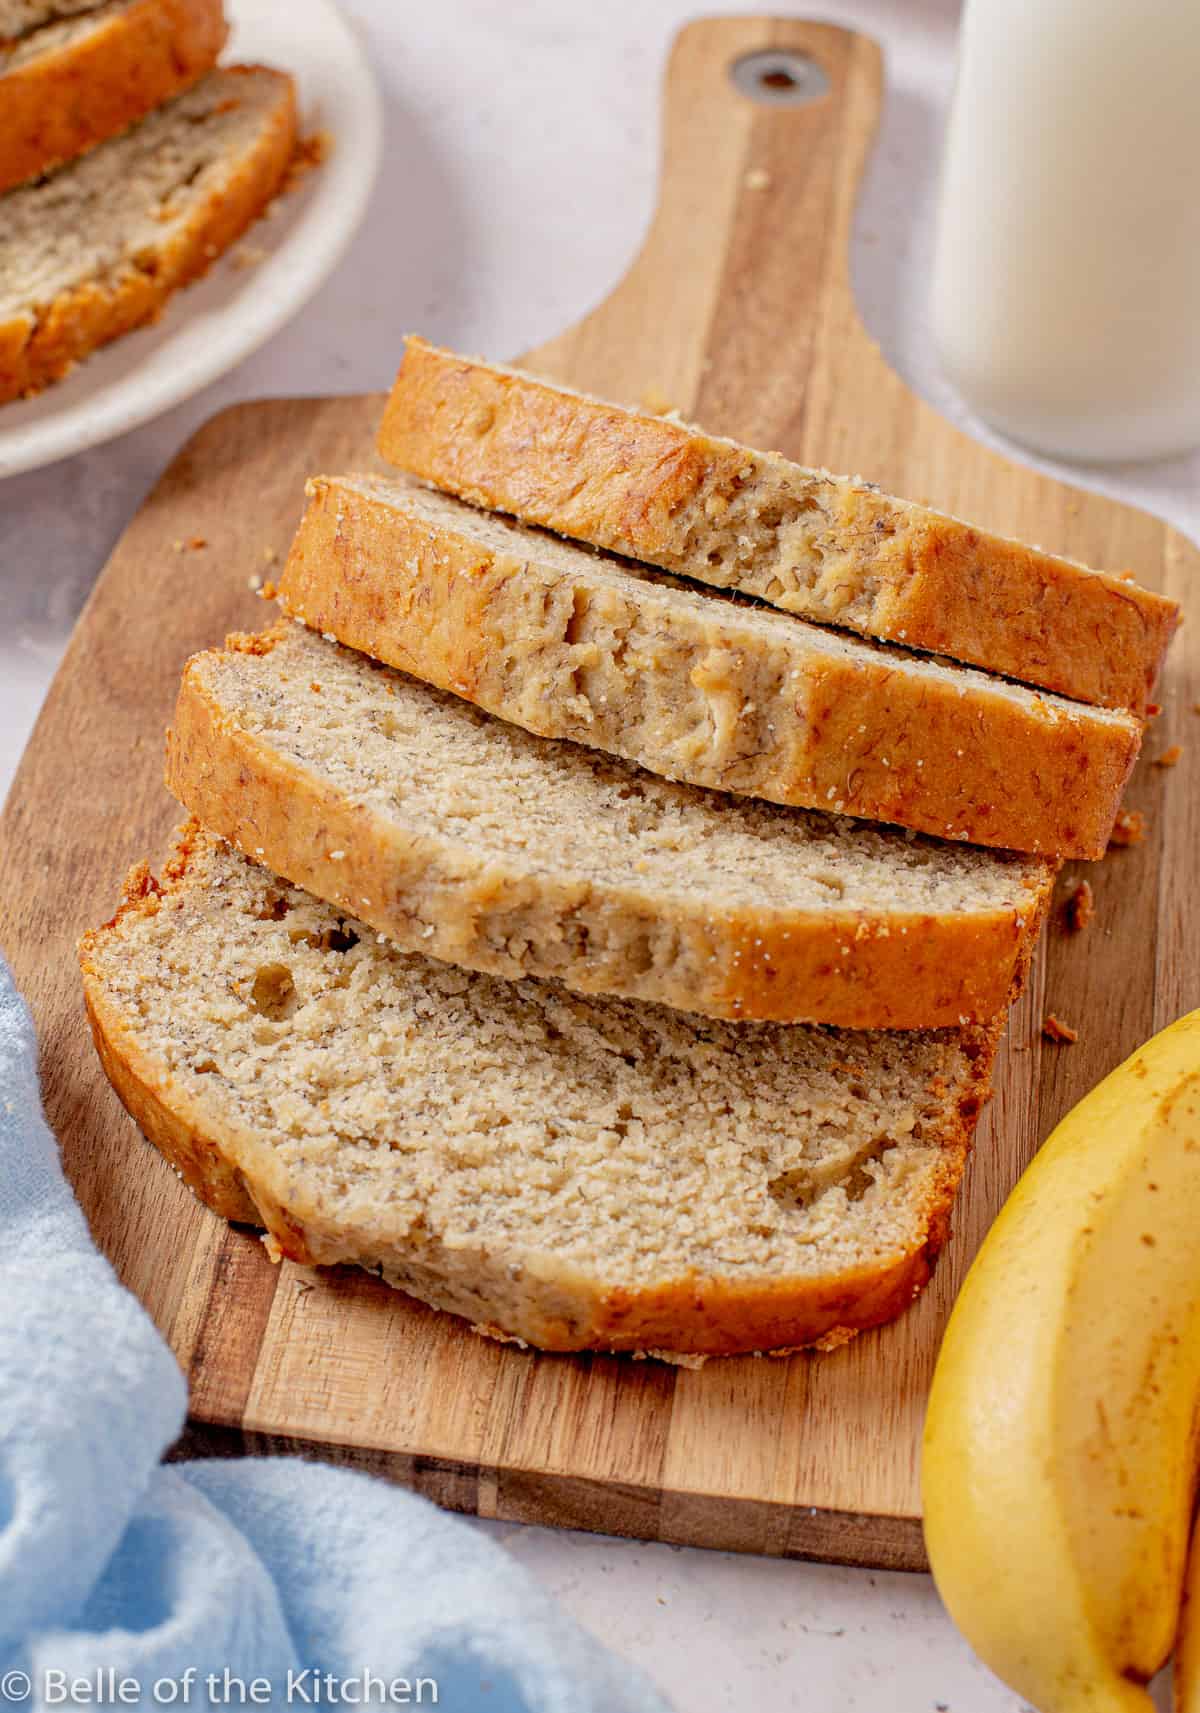 slices of banana bread on a wooden cutting board